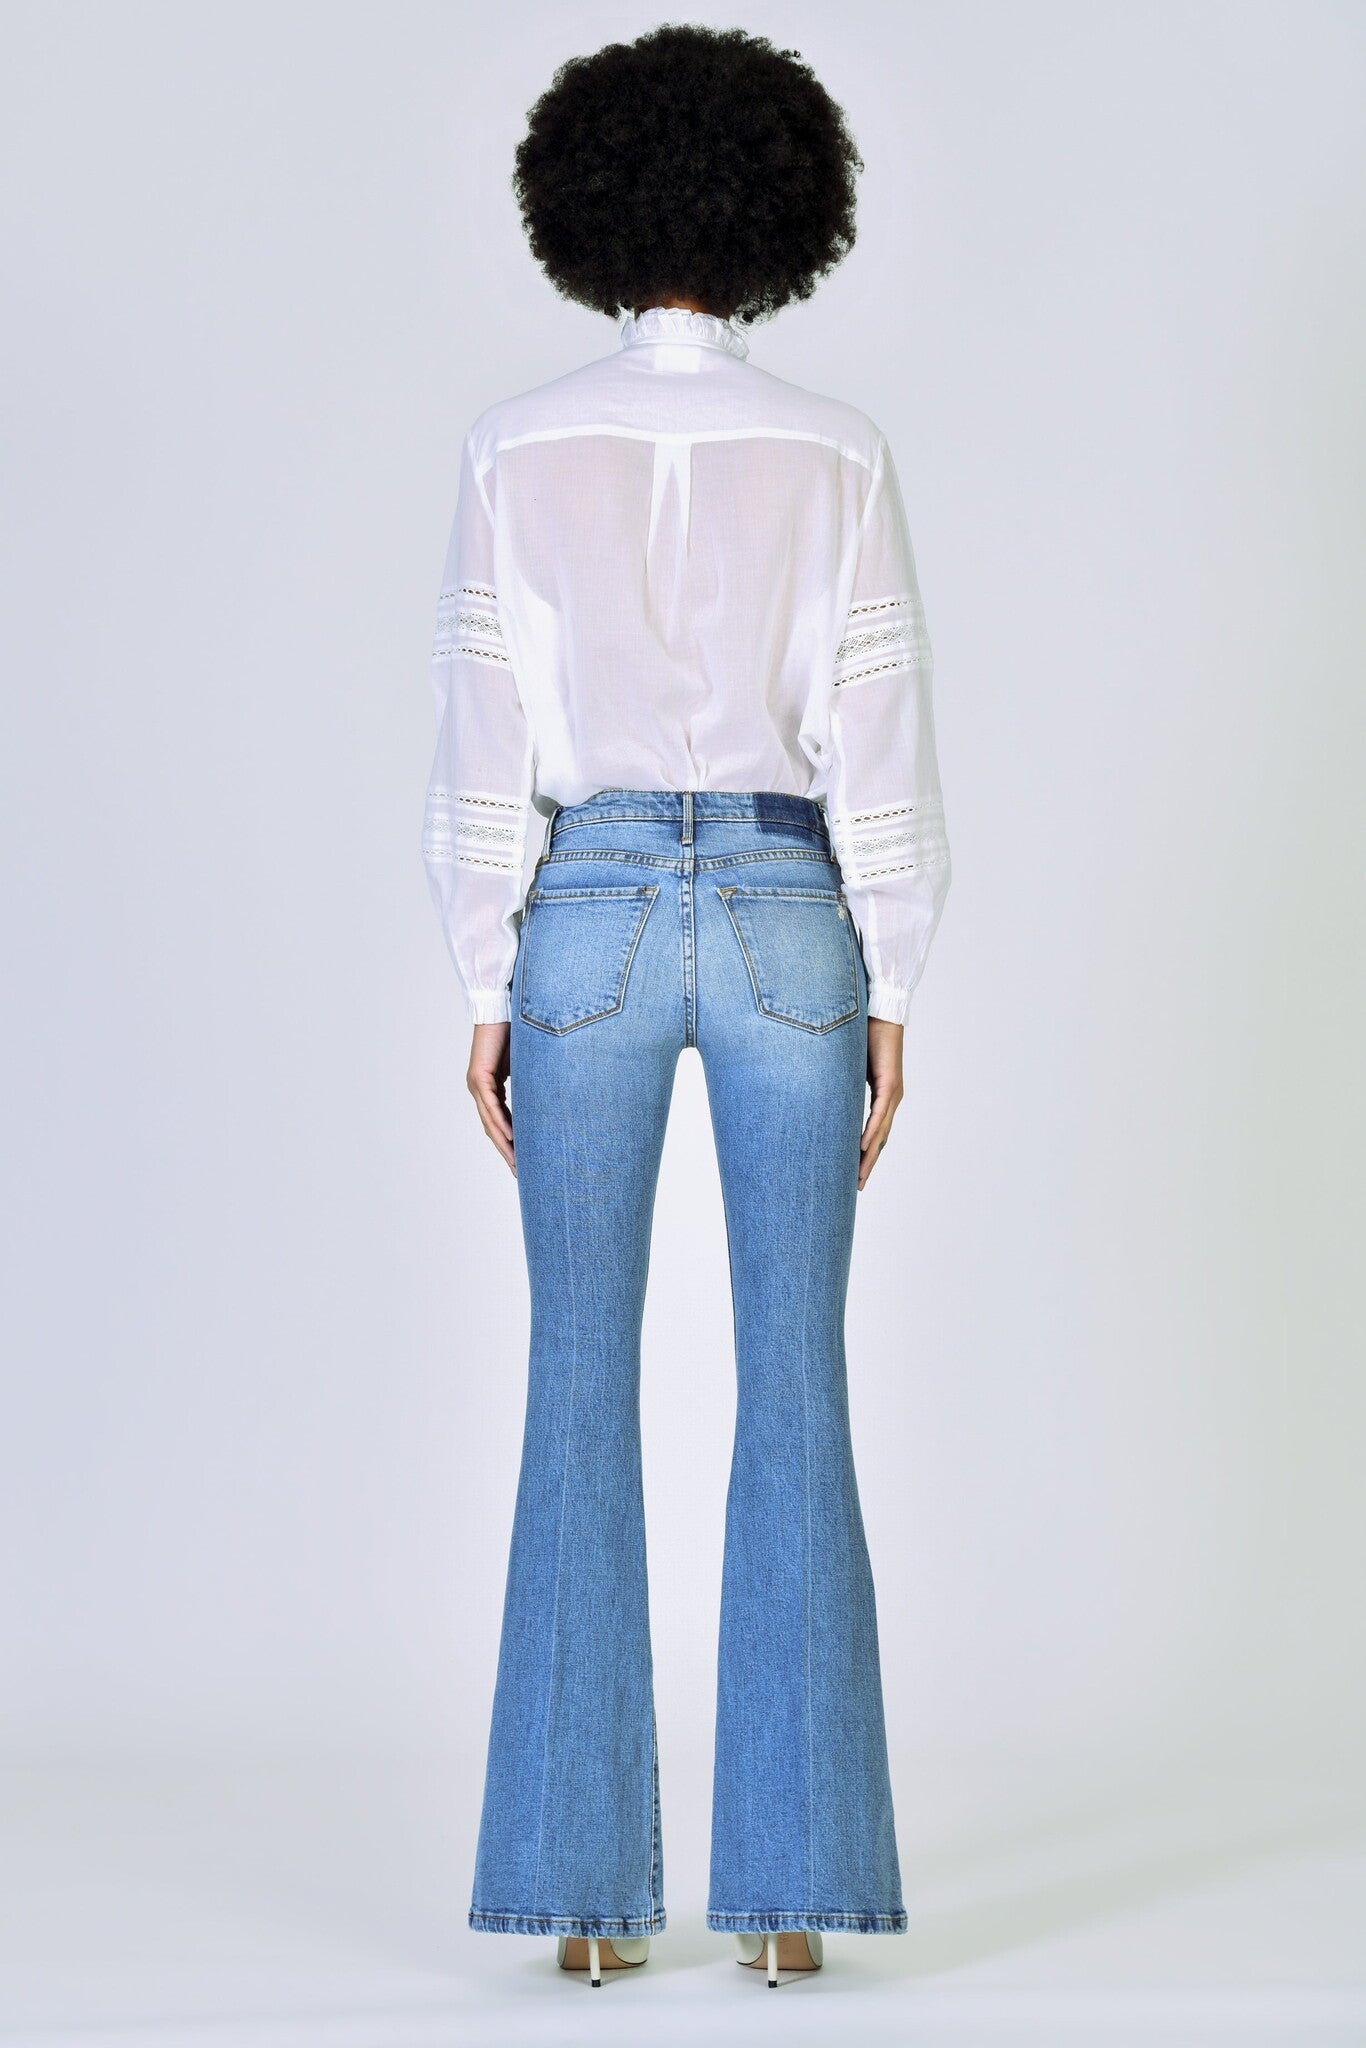 Black Orchid Grace Super Flare Jeans - Nope Never Again - RUM Amsterdam